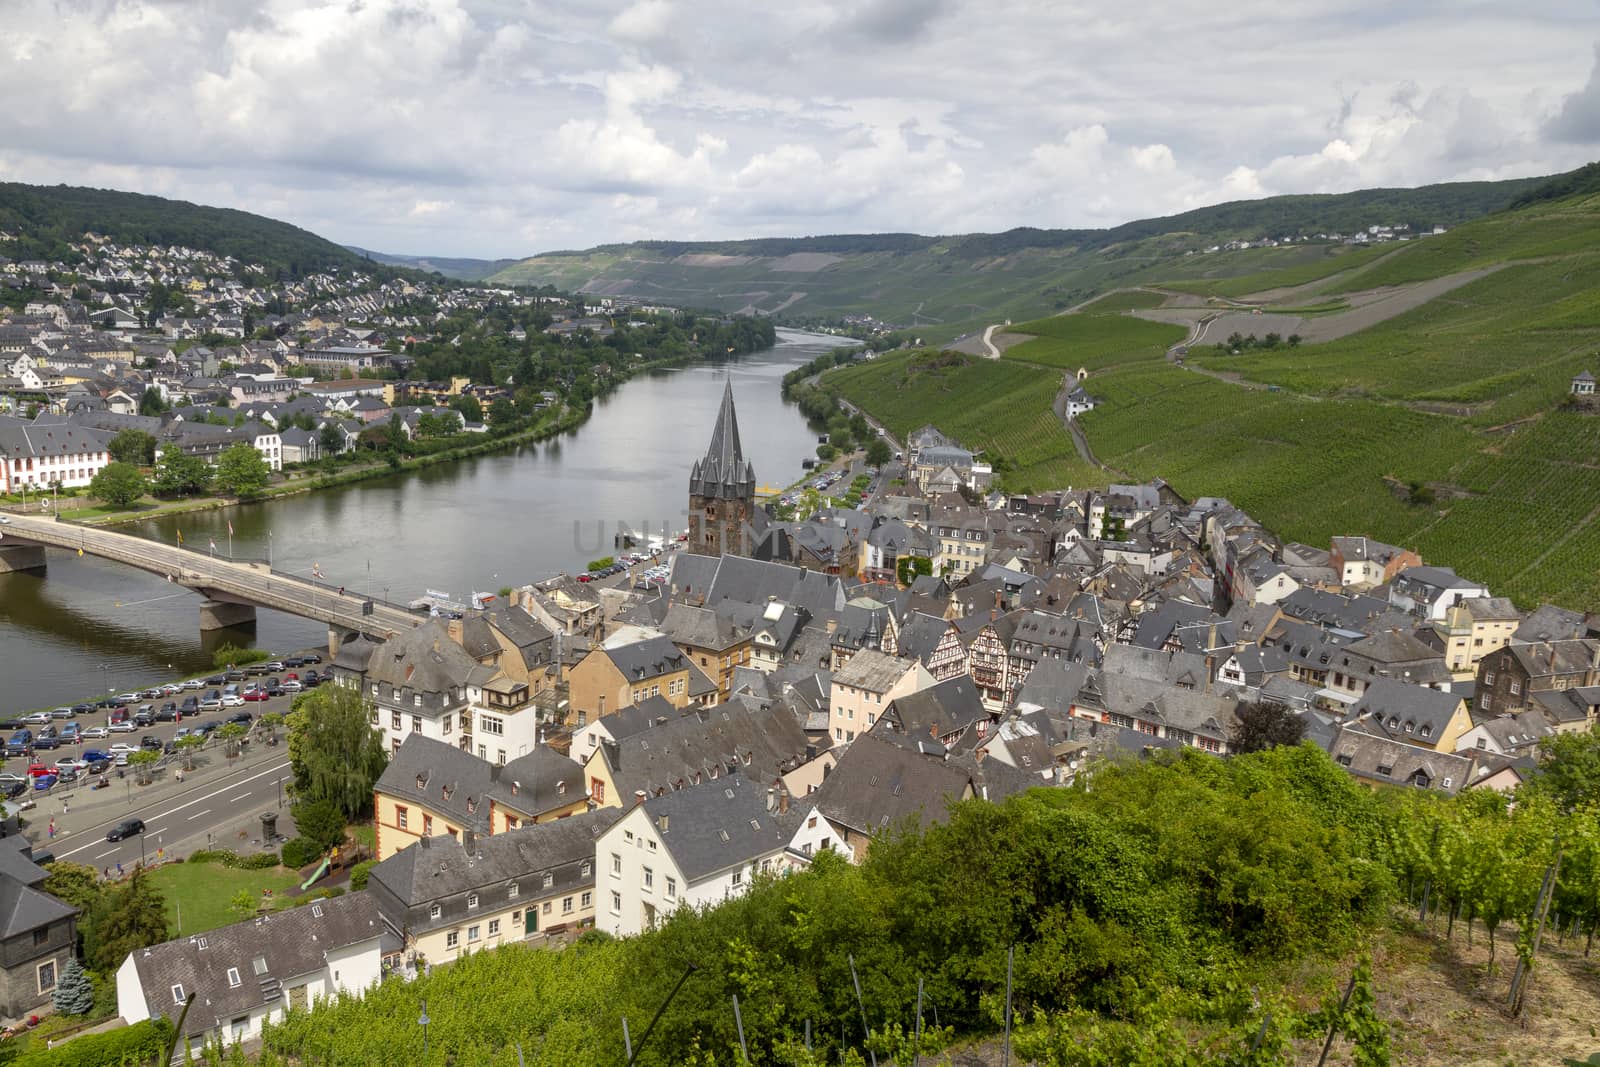 The Mosel valley from top of the Mosel valley bridge close to Winningen in Germany - Image